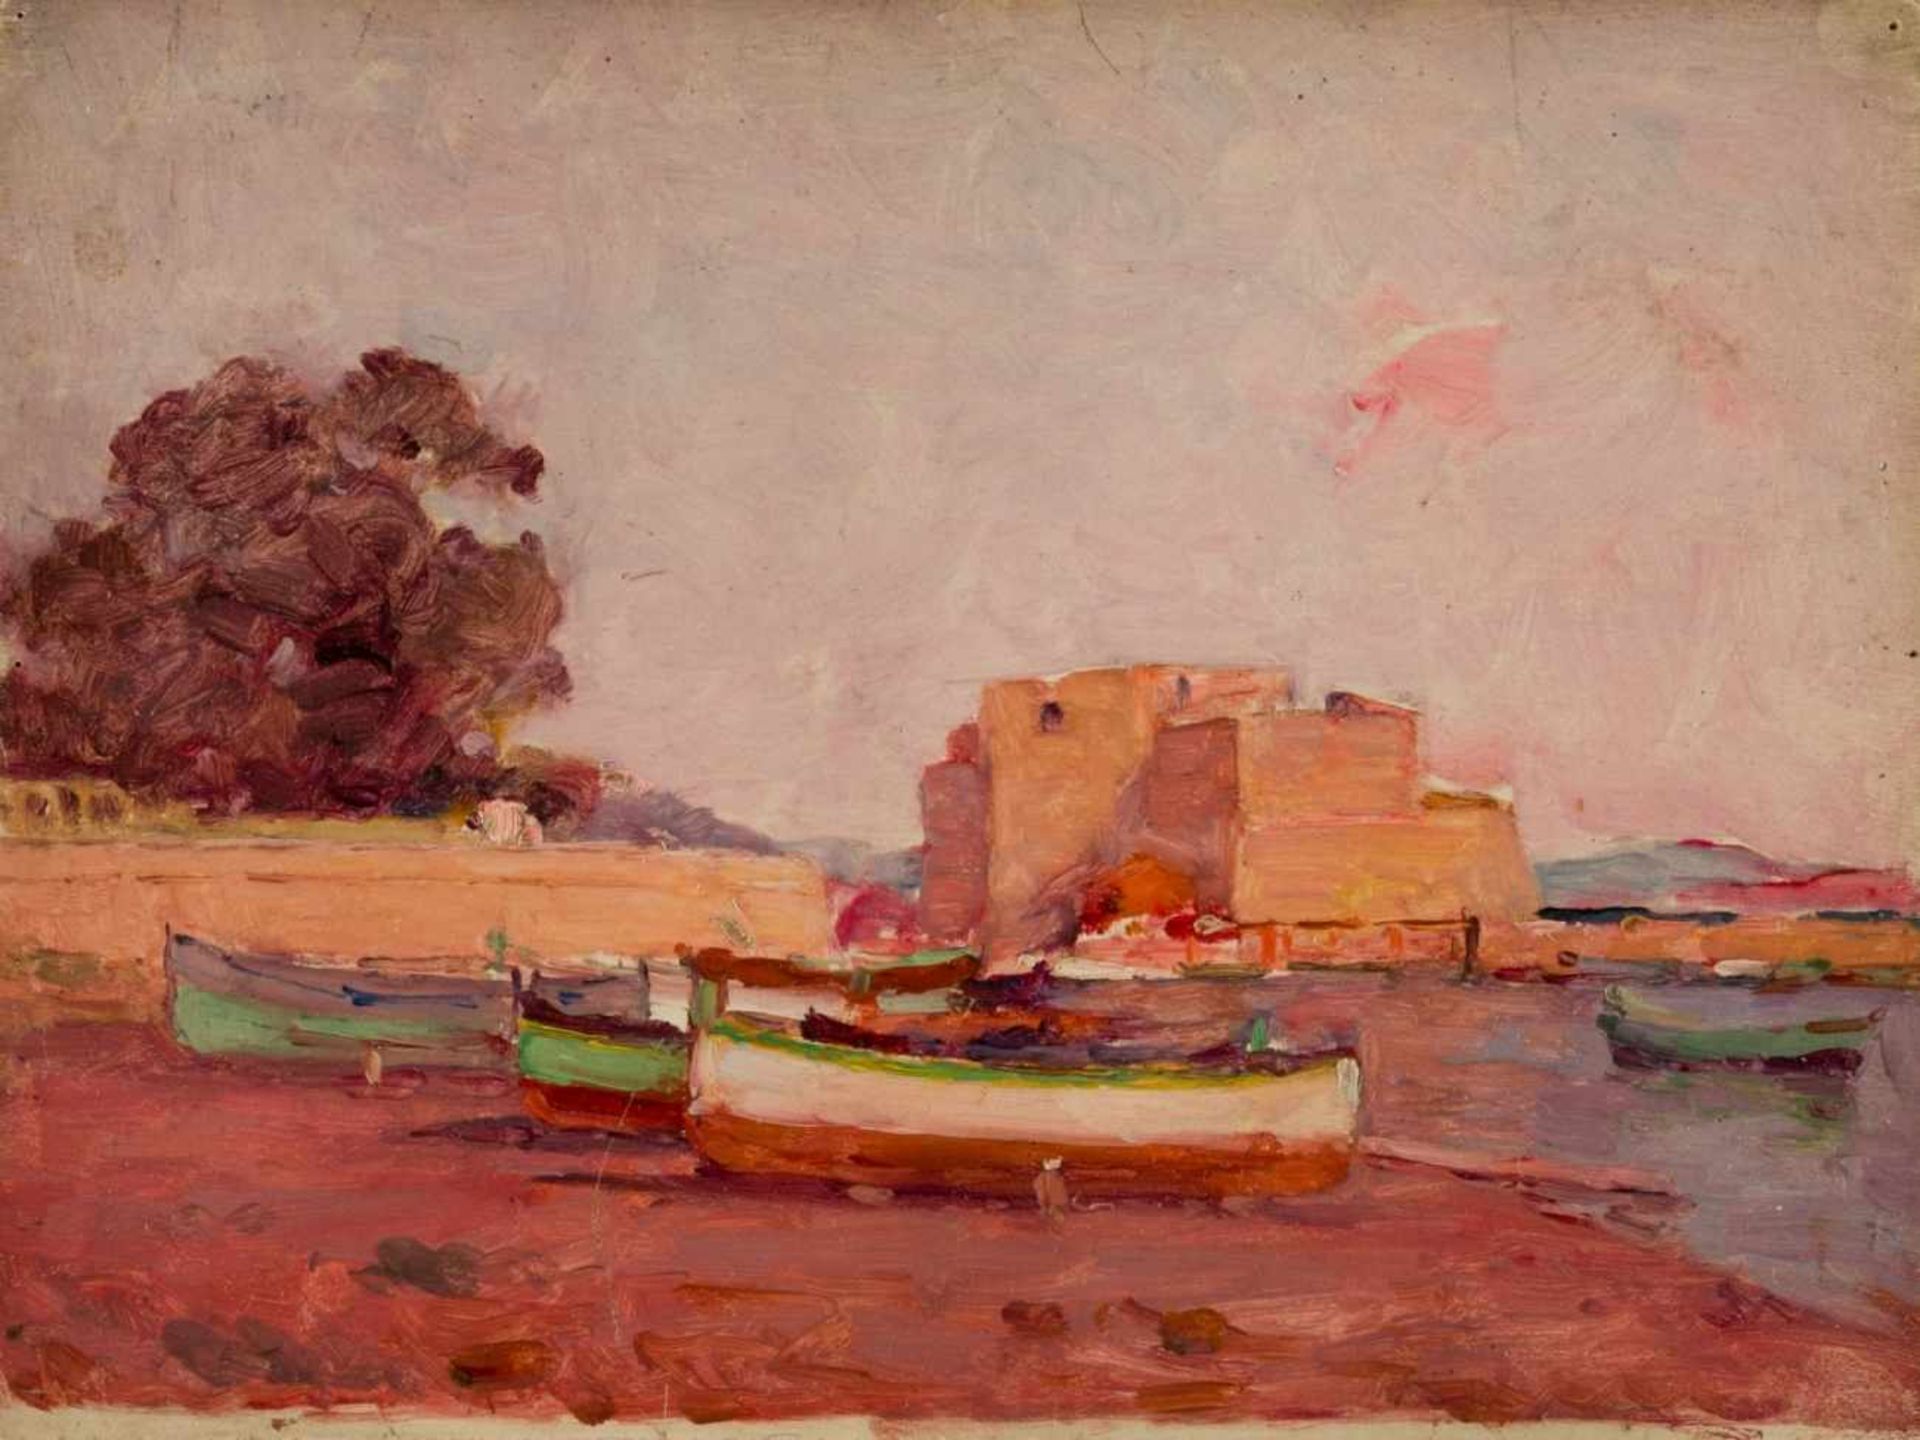 Félix ZIEM (1821-1911), Studio, Boats on the beach, oil on board, verso with stamp''Atelier